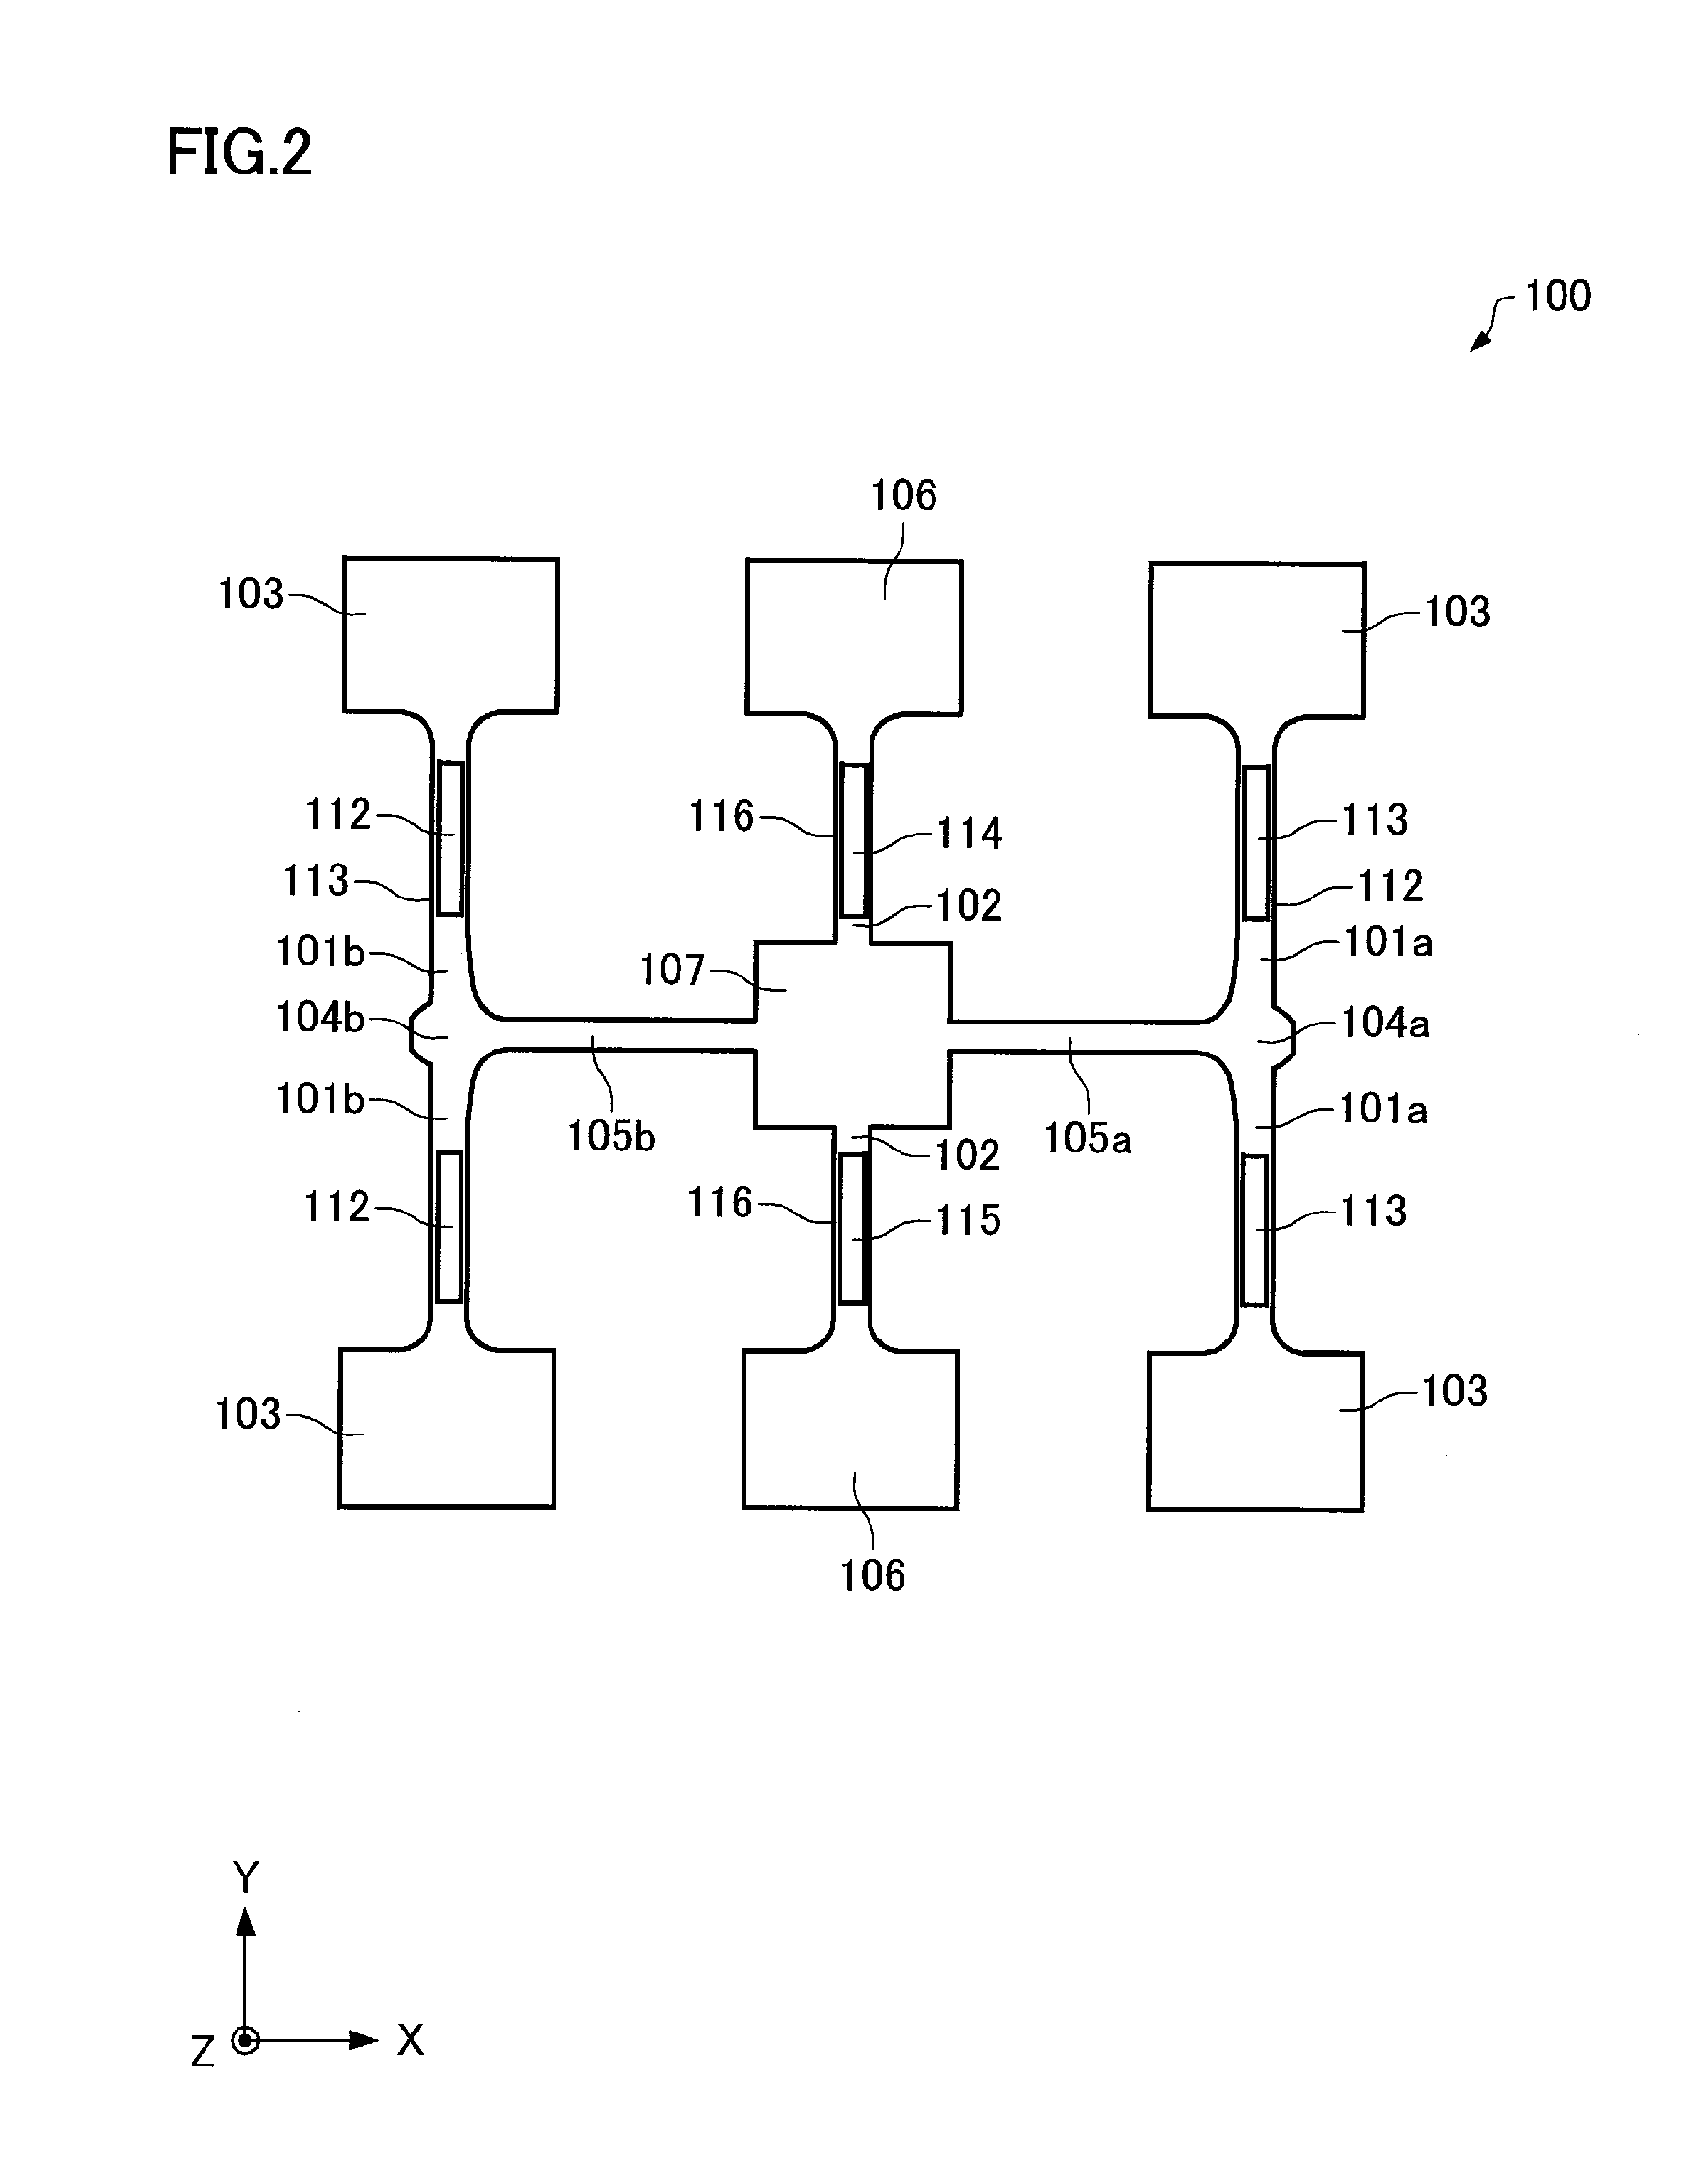 Signal processing circuit, physical quantity detection apparatus, angular velocity detection apparatus, integrated circuit device, and electronic instrument